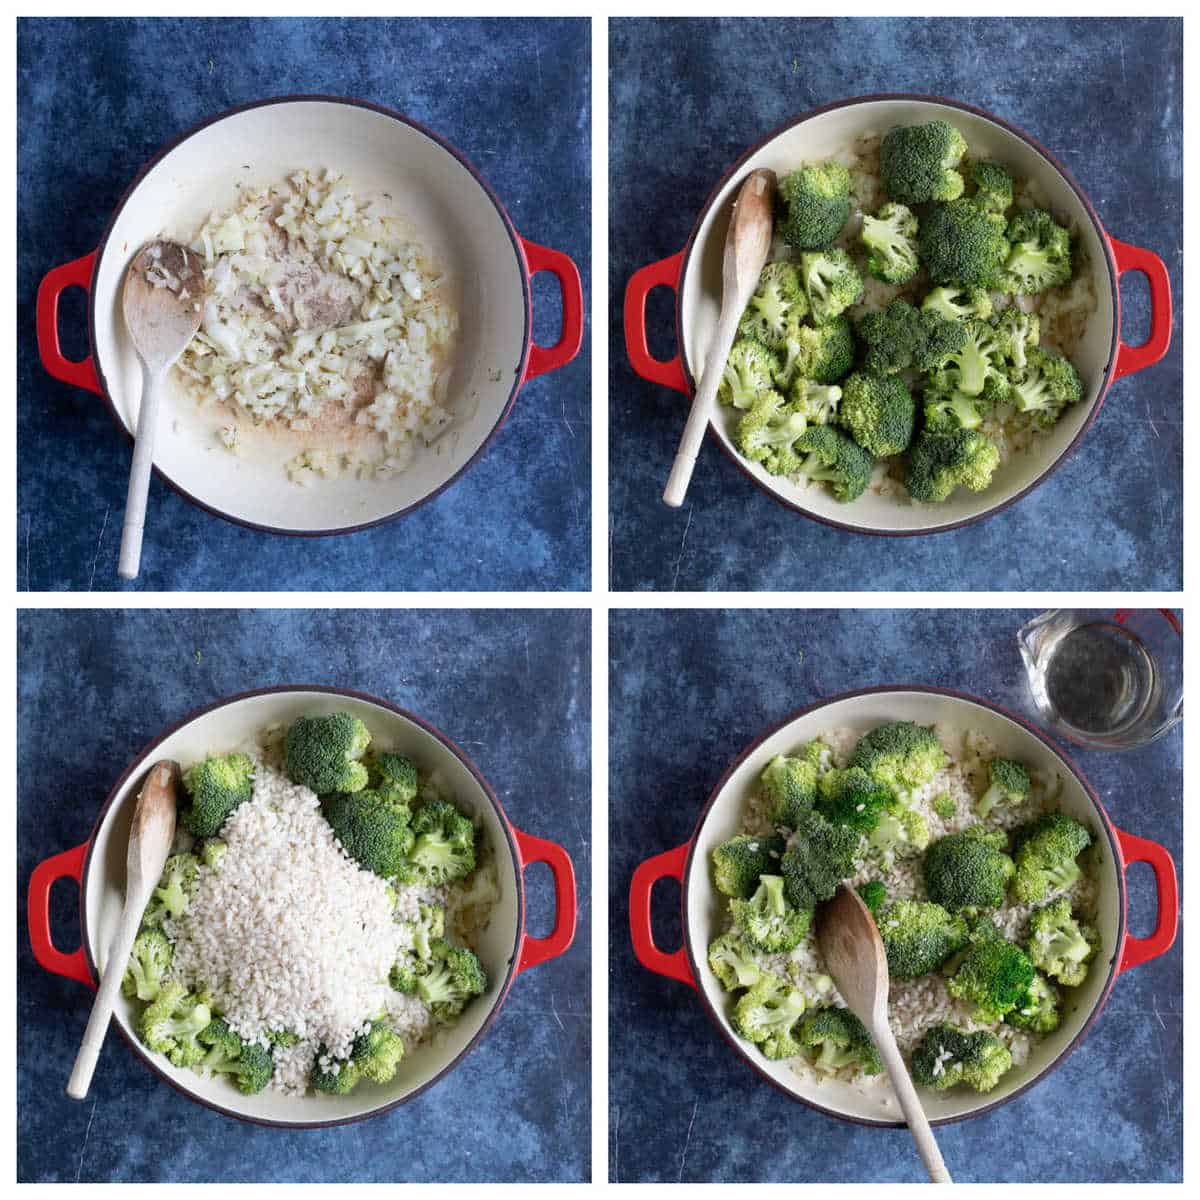 Step by step photo instructions for making broccoli and wild garlic risotto part 1.